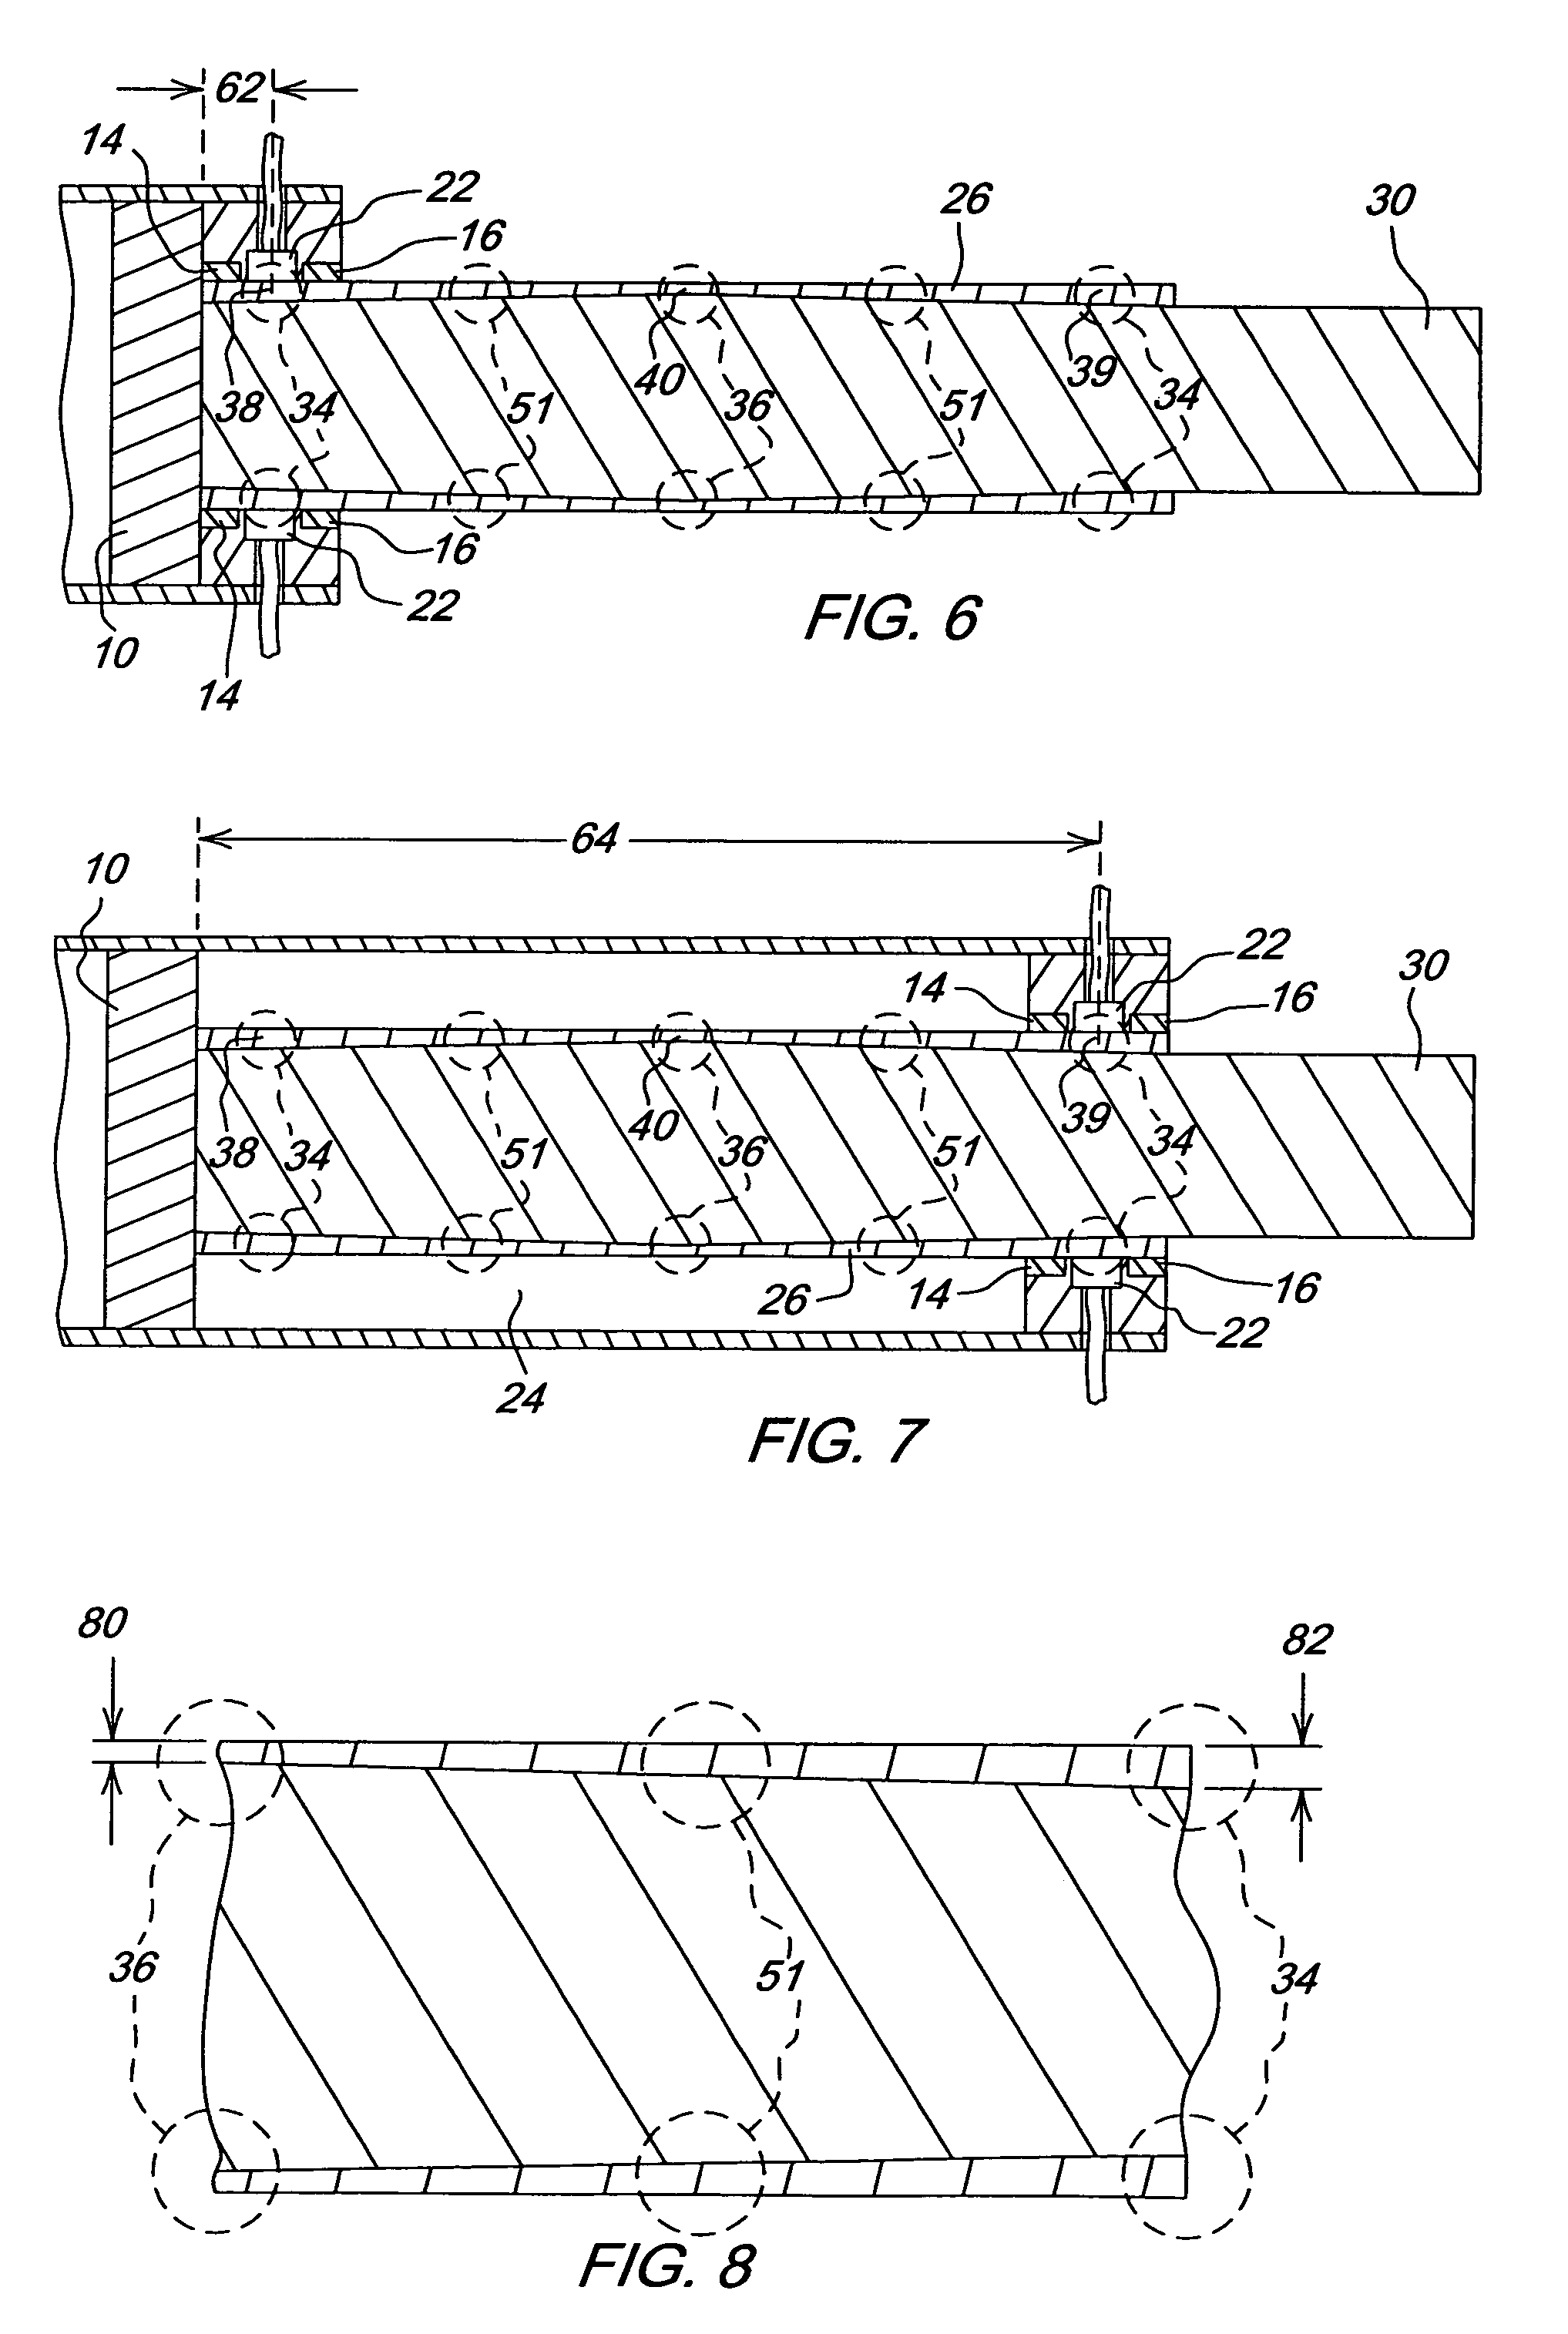 System and method for detecting the axial position of a shaft or a member attached thereto